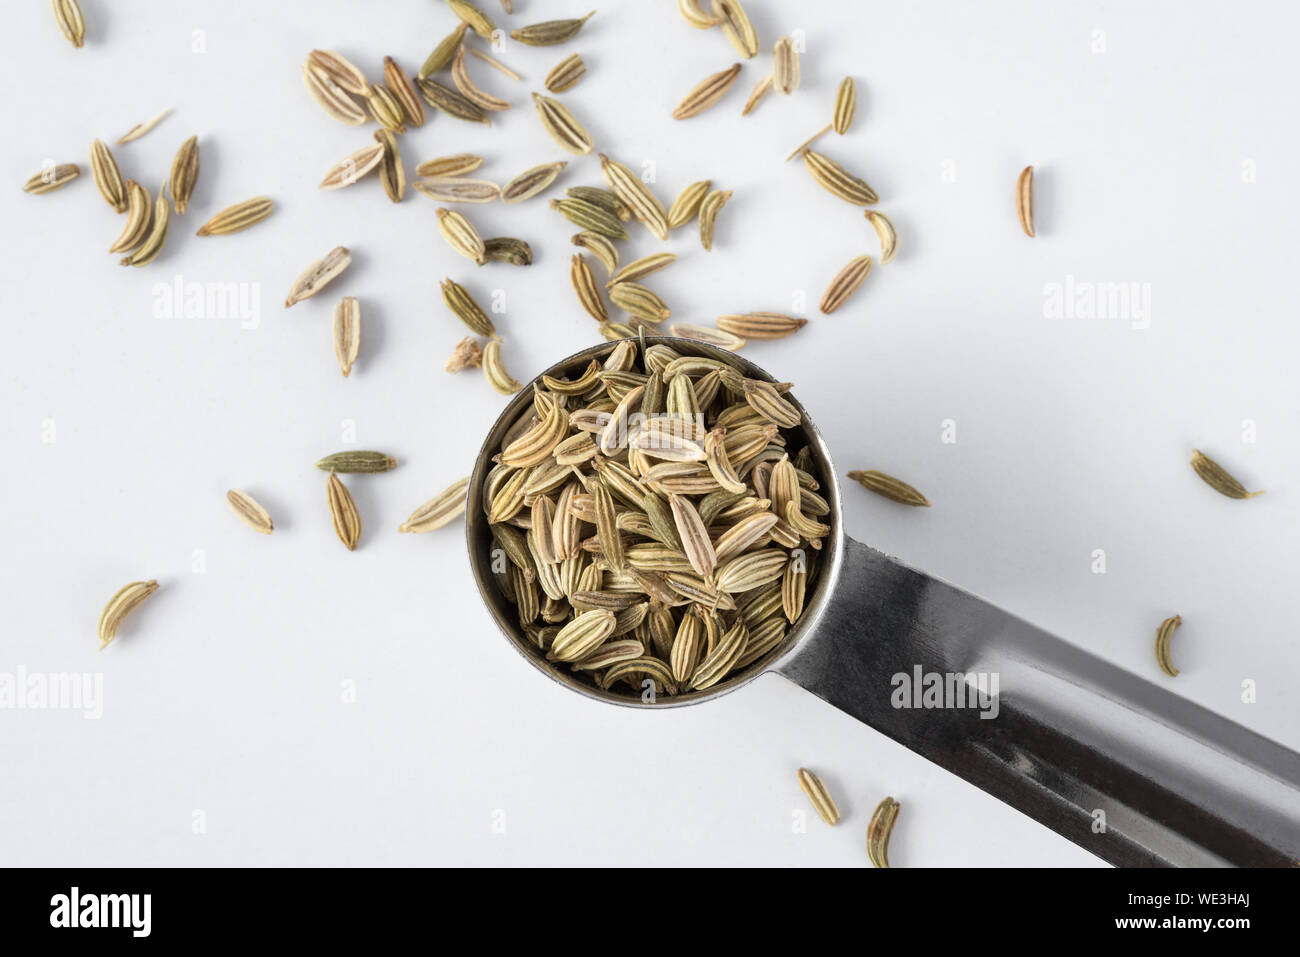 High Angle View Of Fennel Seeds In Measuring Spoon Against White Background Stock Photo